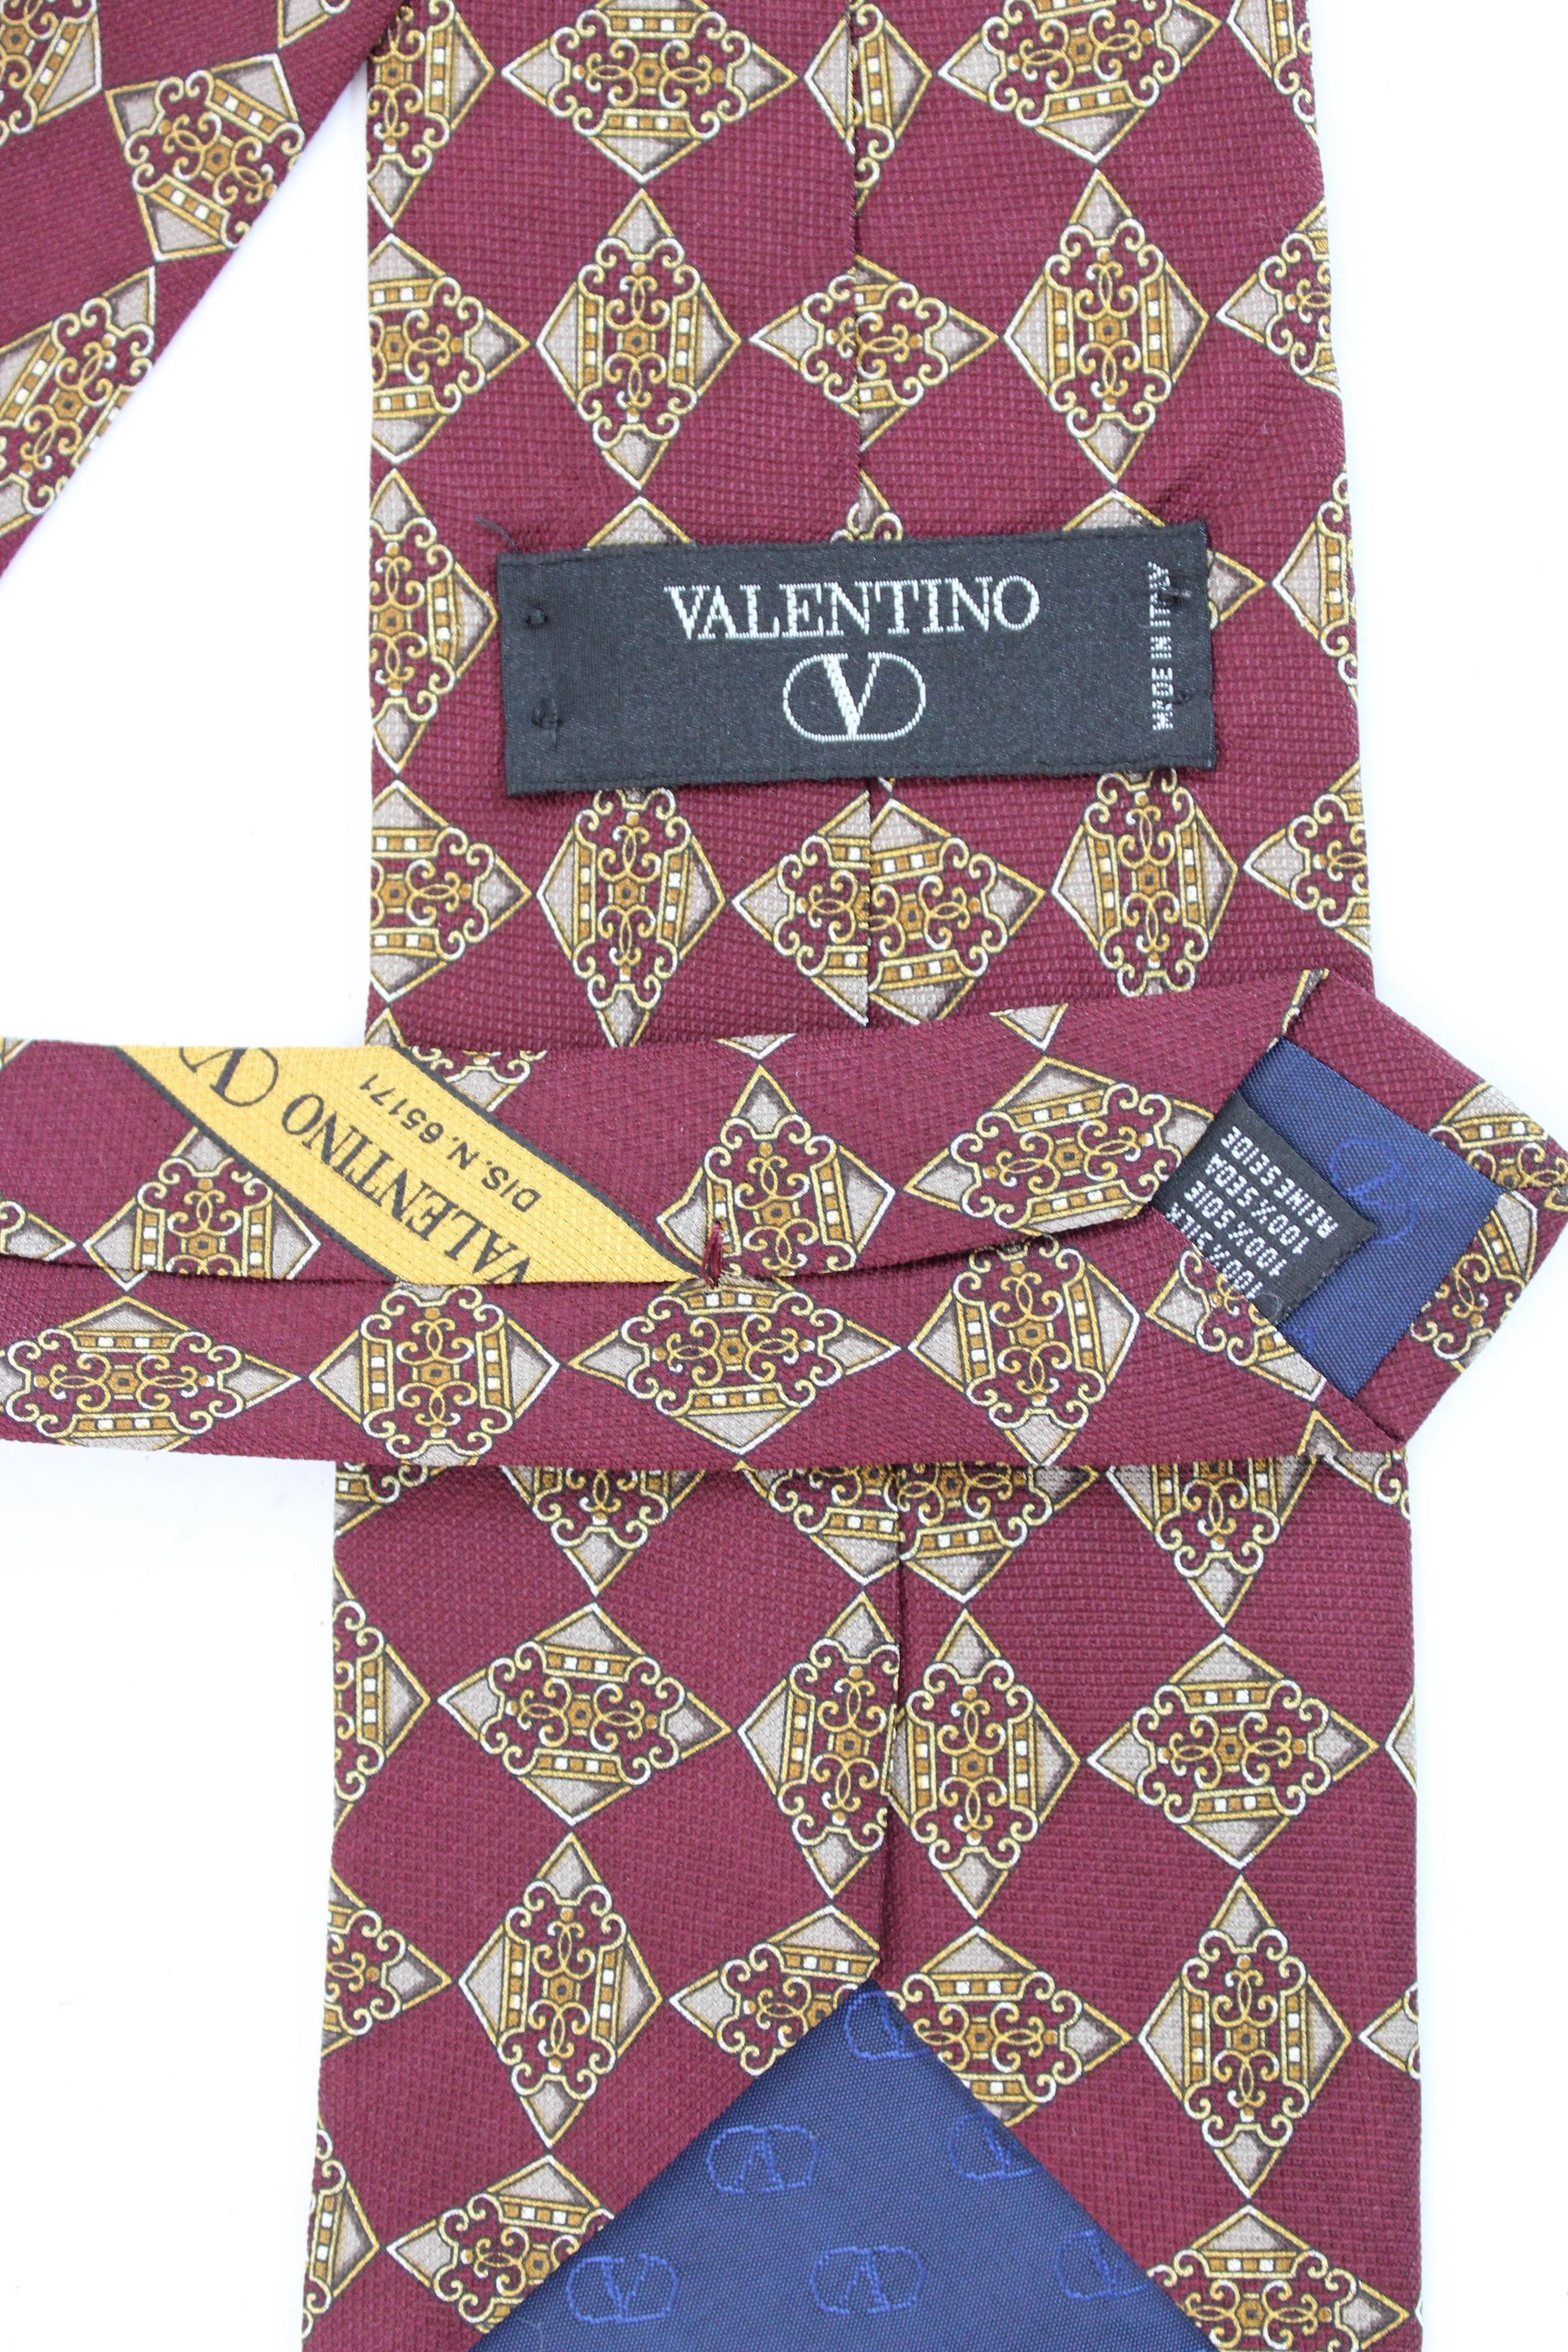 burgundy and gold tie